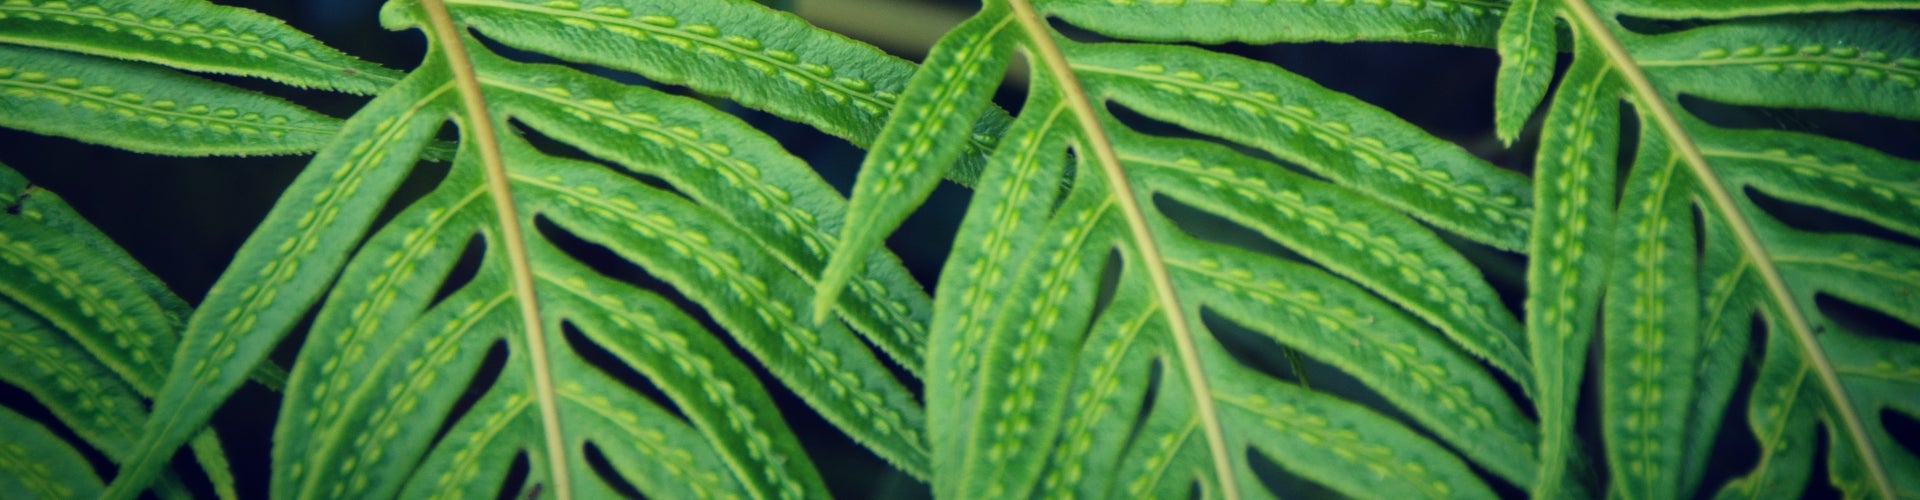 The leaves of bright green ferns with a light green dotted-line pattern along the fronds.